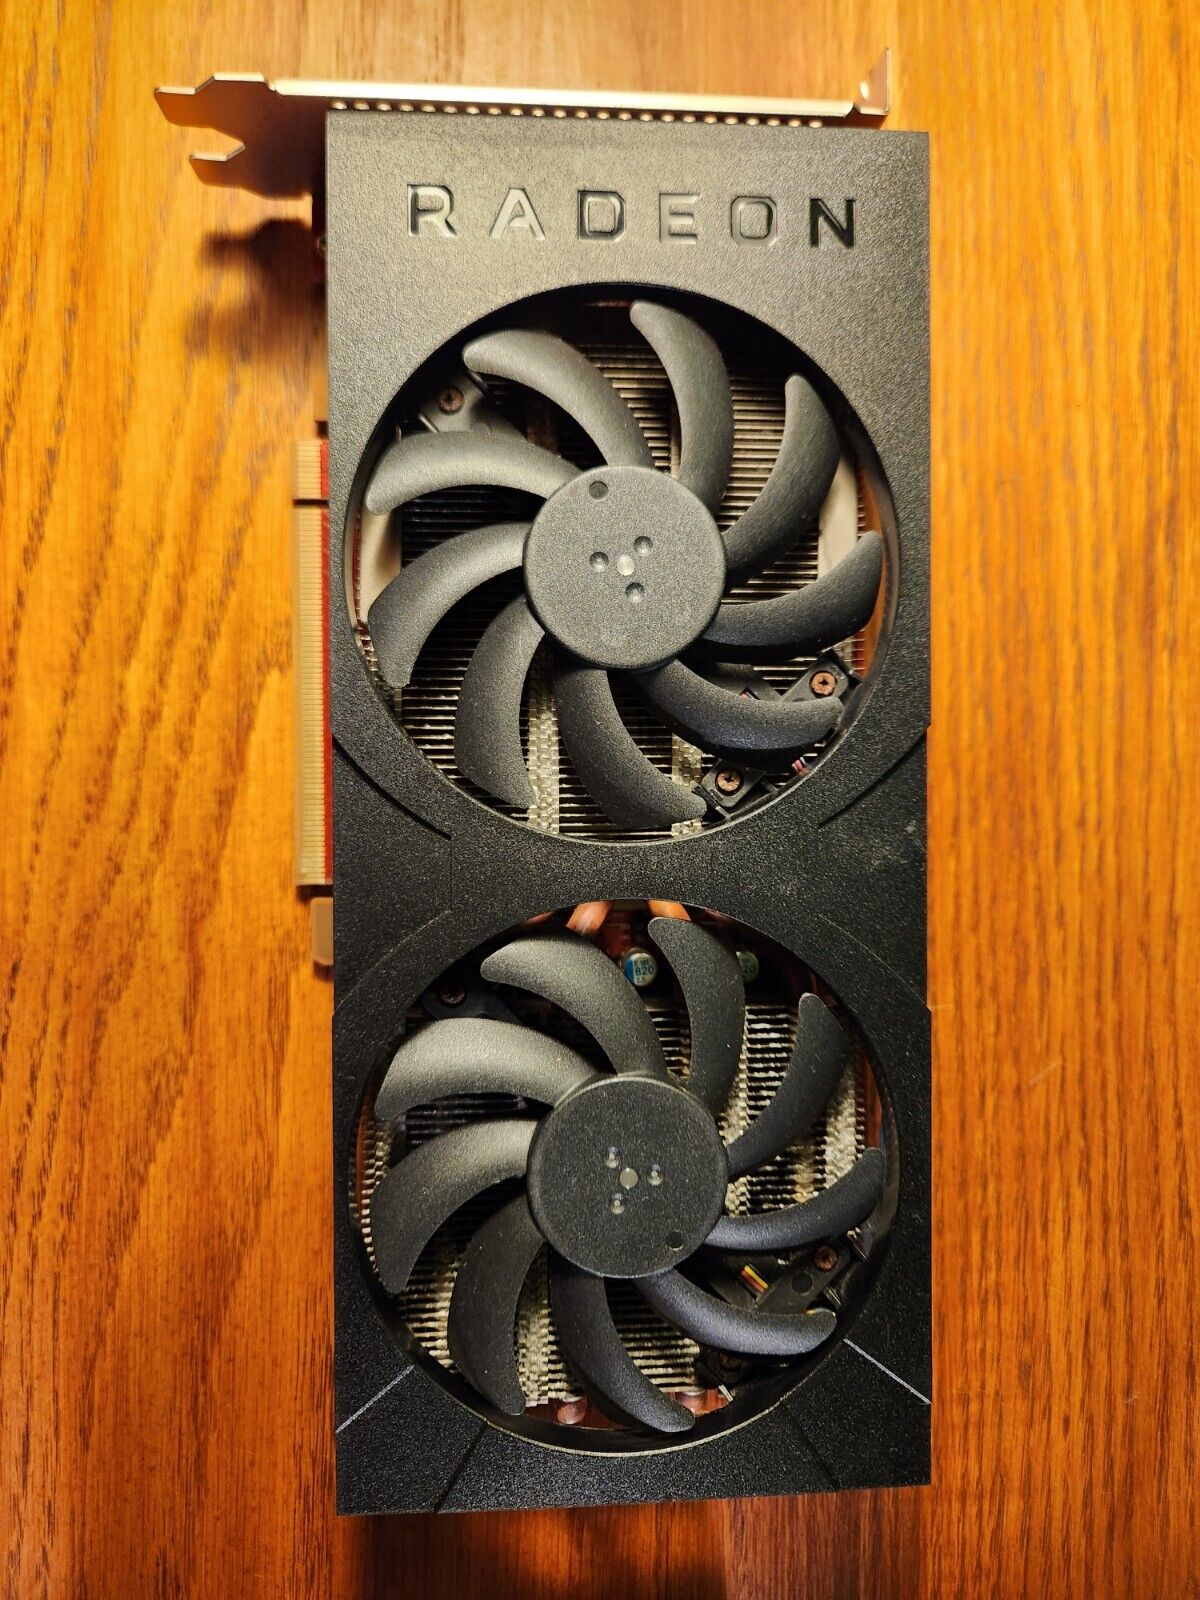 AMD Radeon RX 5700 XT 8GB GDDR6 Graphics Card 04FCCX Made by Dell